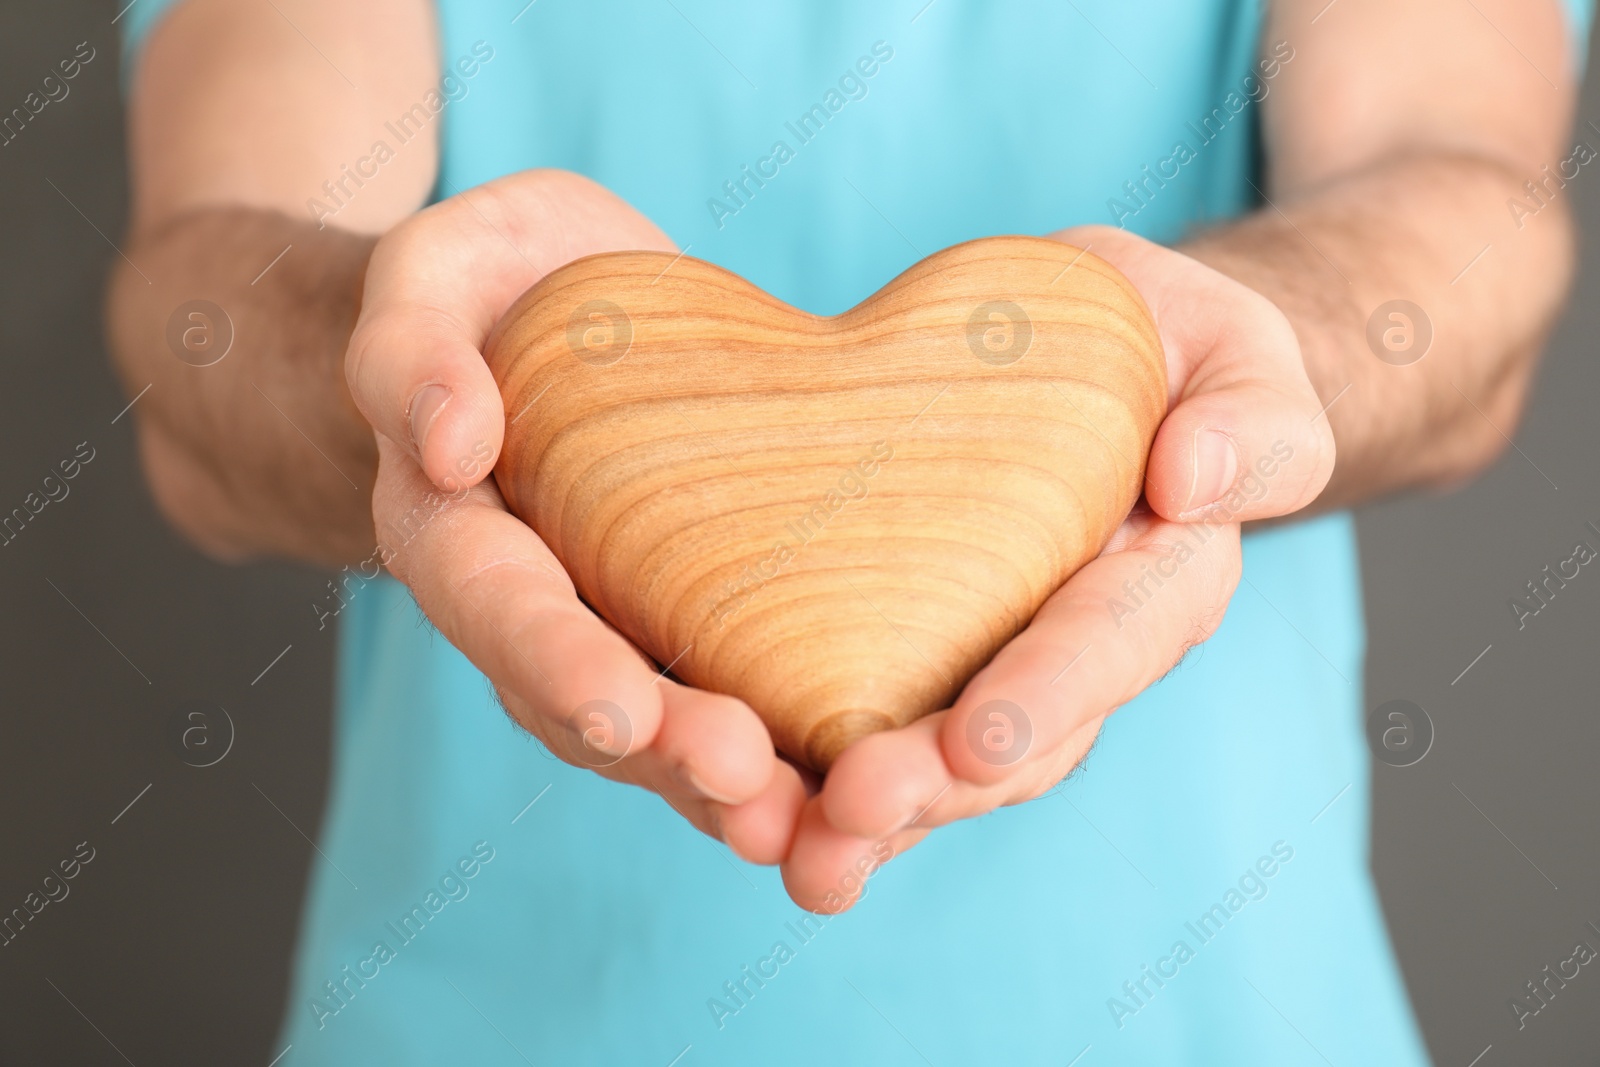 Photo of Young man holding wooden heart in his hands on grey background, closeup